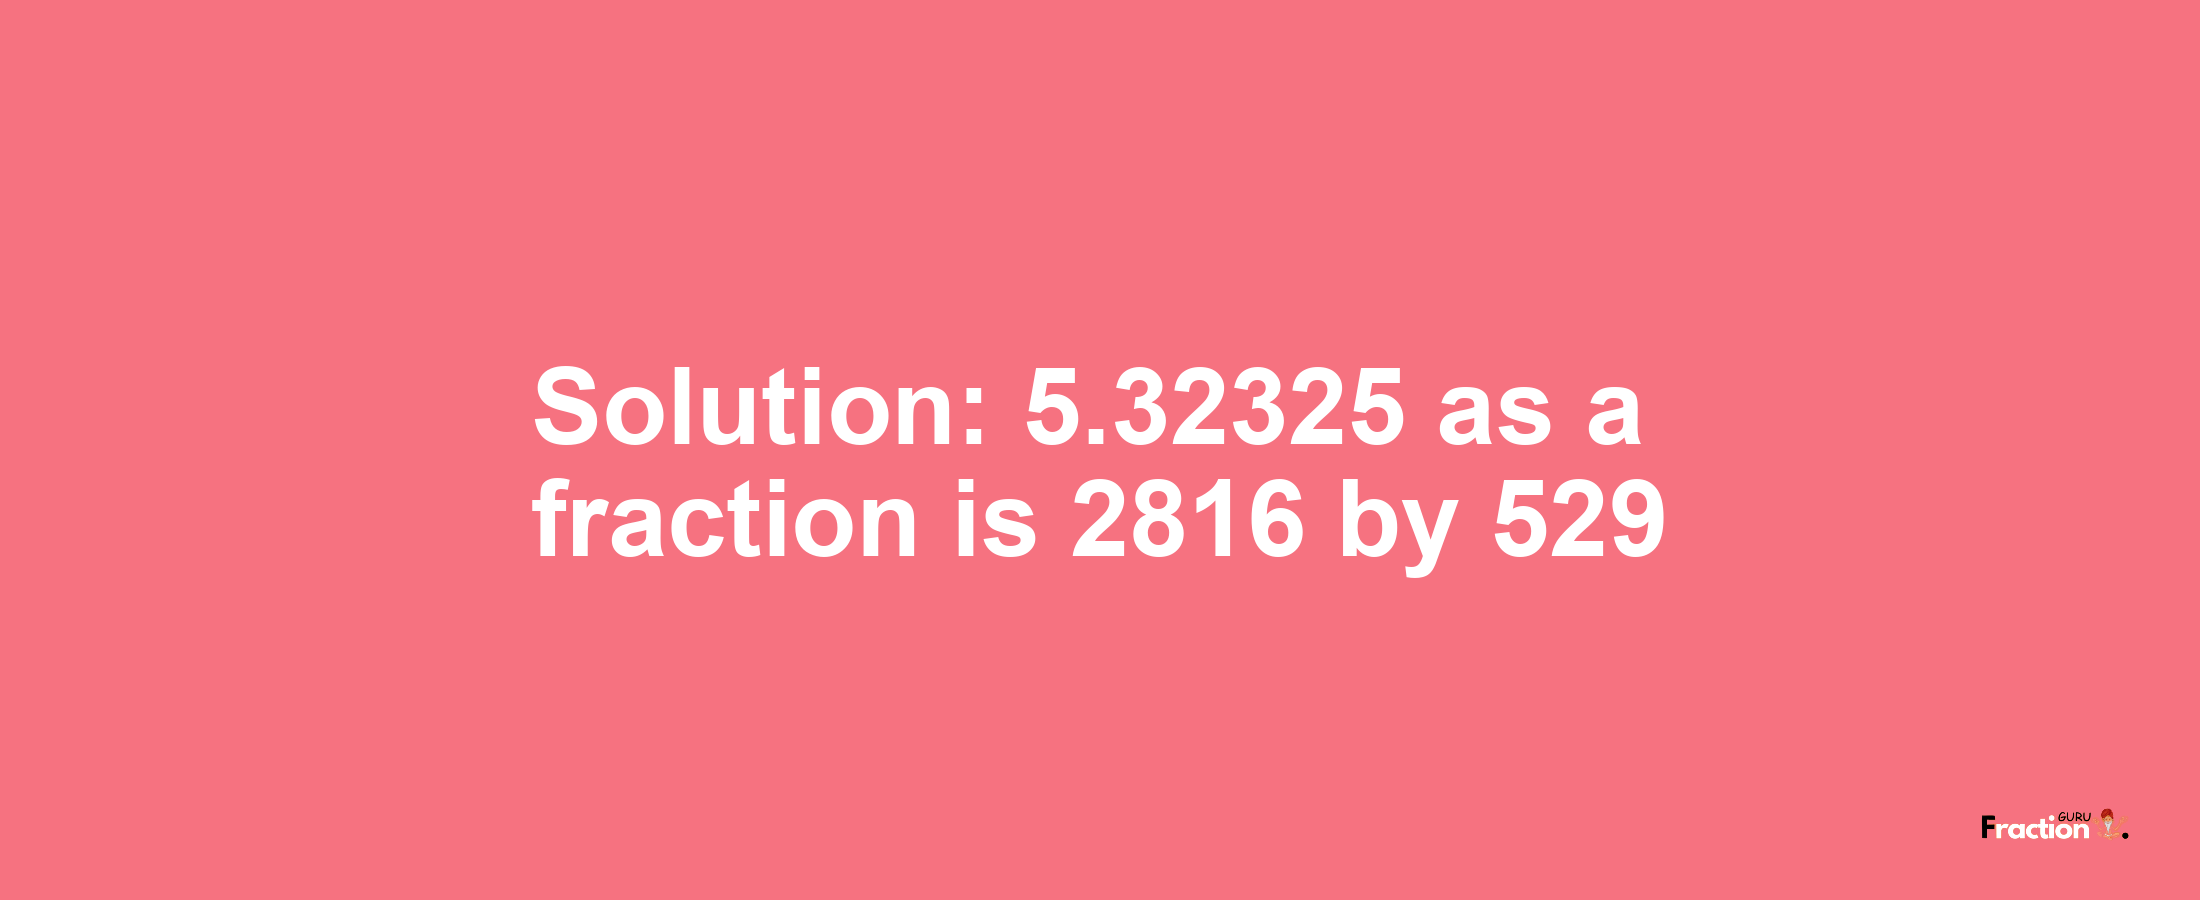 Solution:5.32325 as a fraction is 2816/529